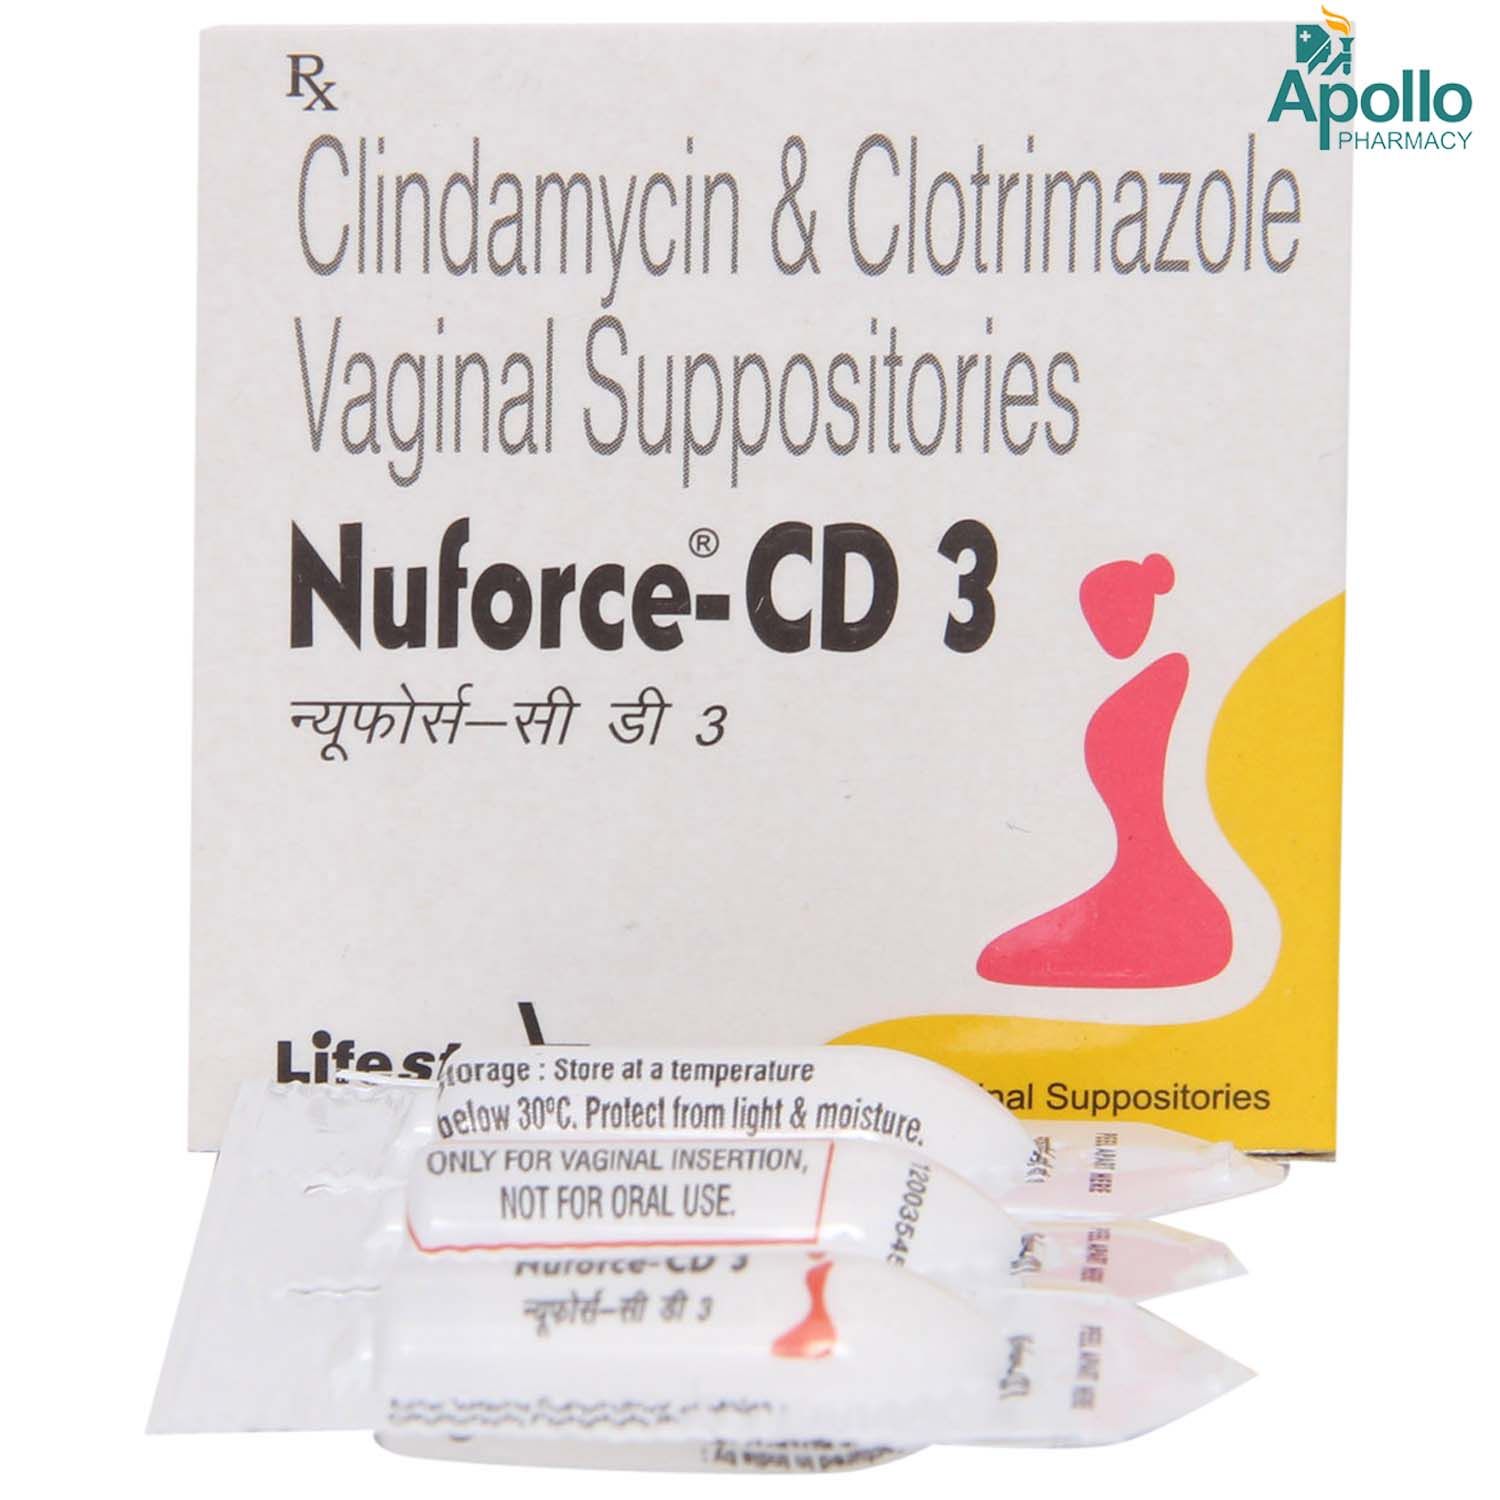 Nuforce CD 3 Vag Suppositories 3's, Pack of 3 SUPPOSITORYS